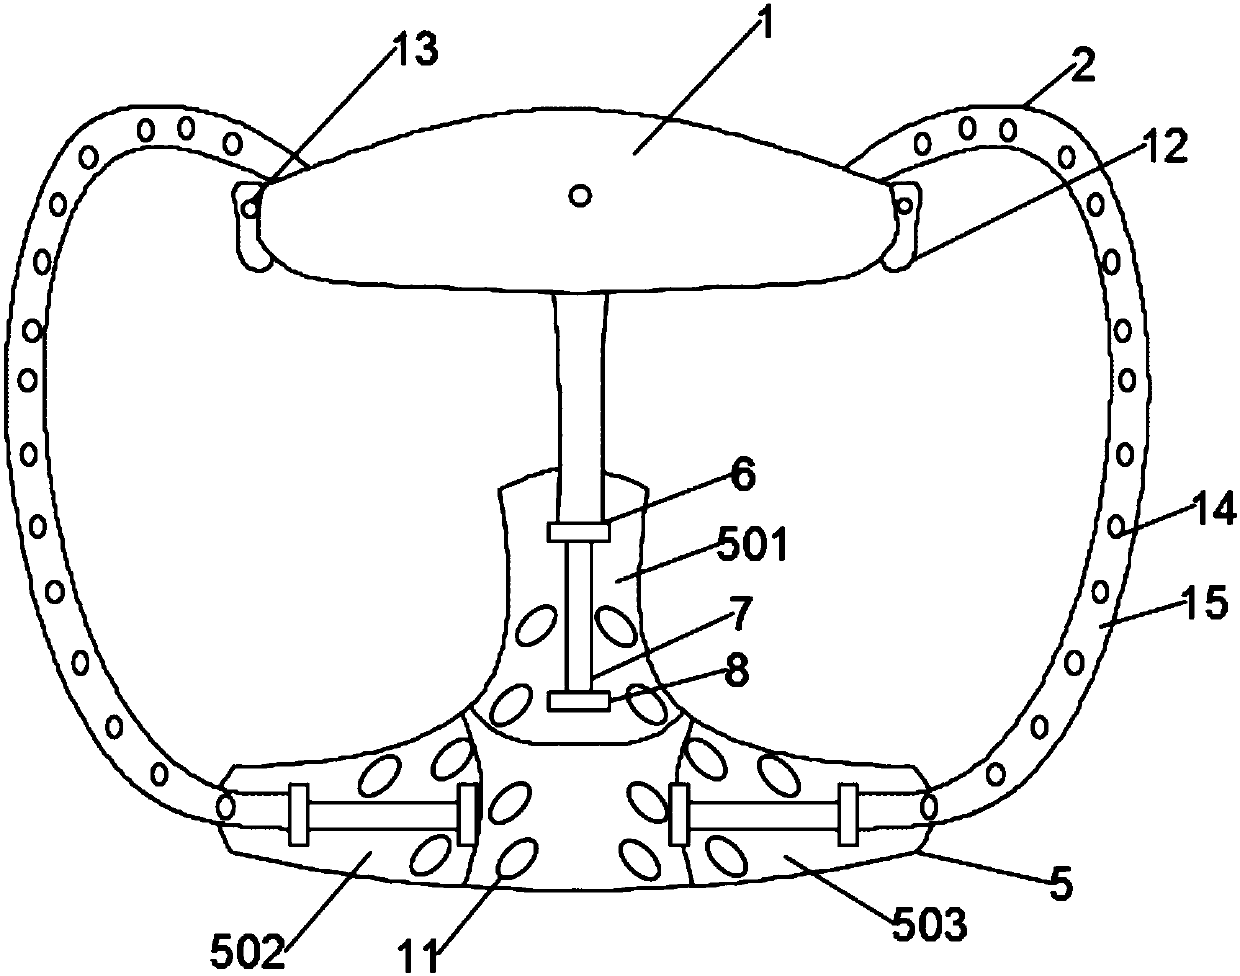 Incision protection device of implanted type cardiac pacemaker